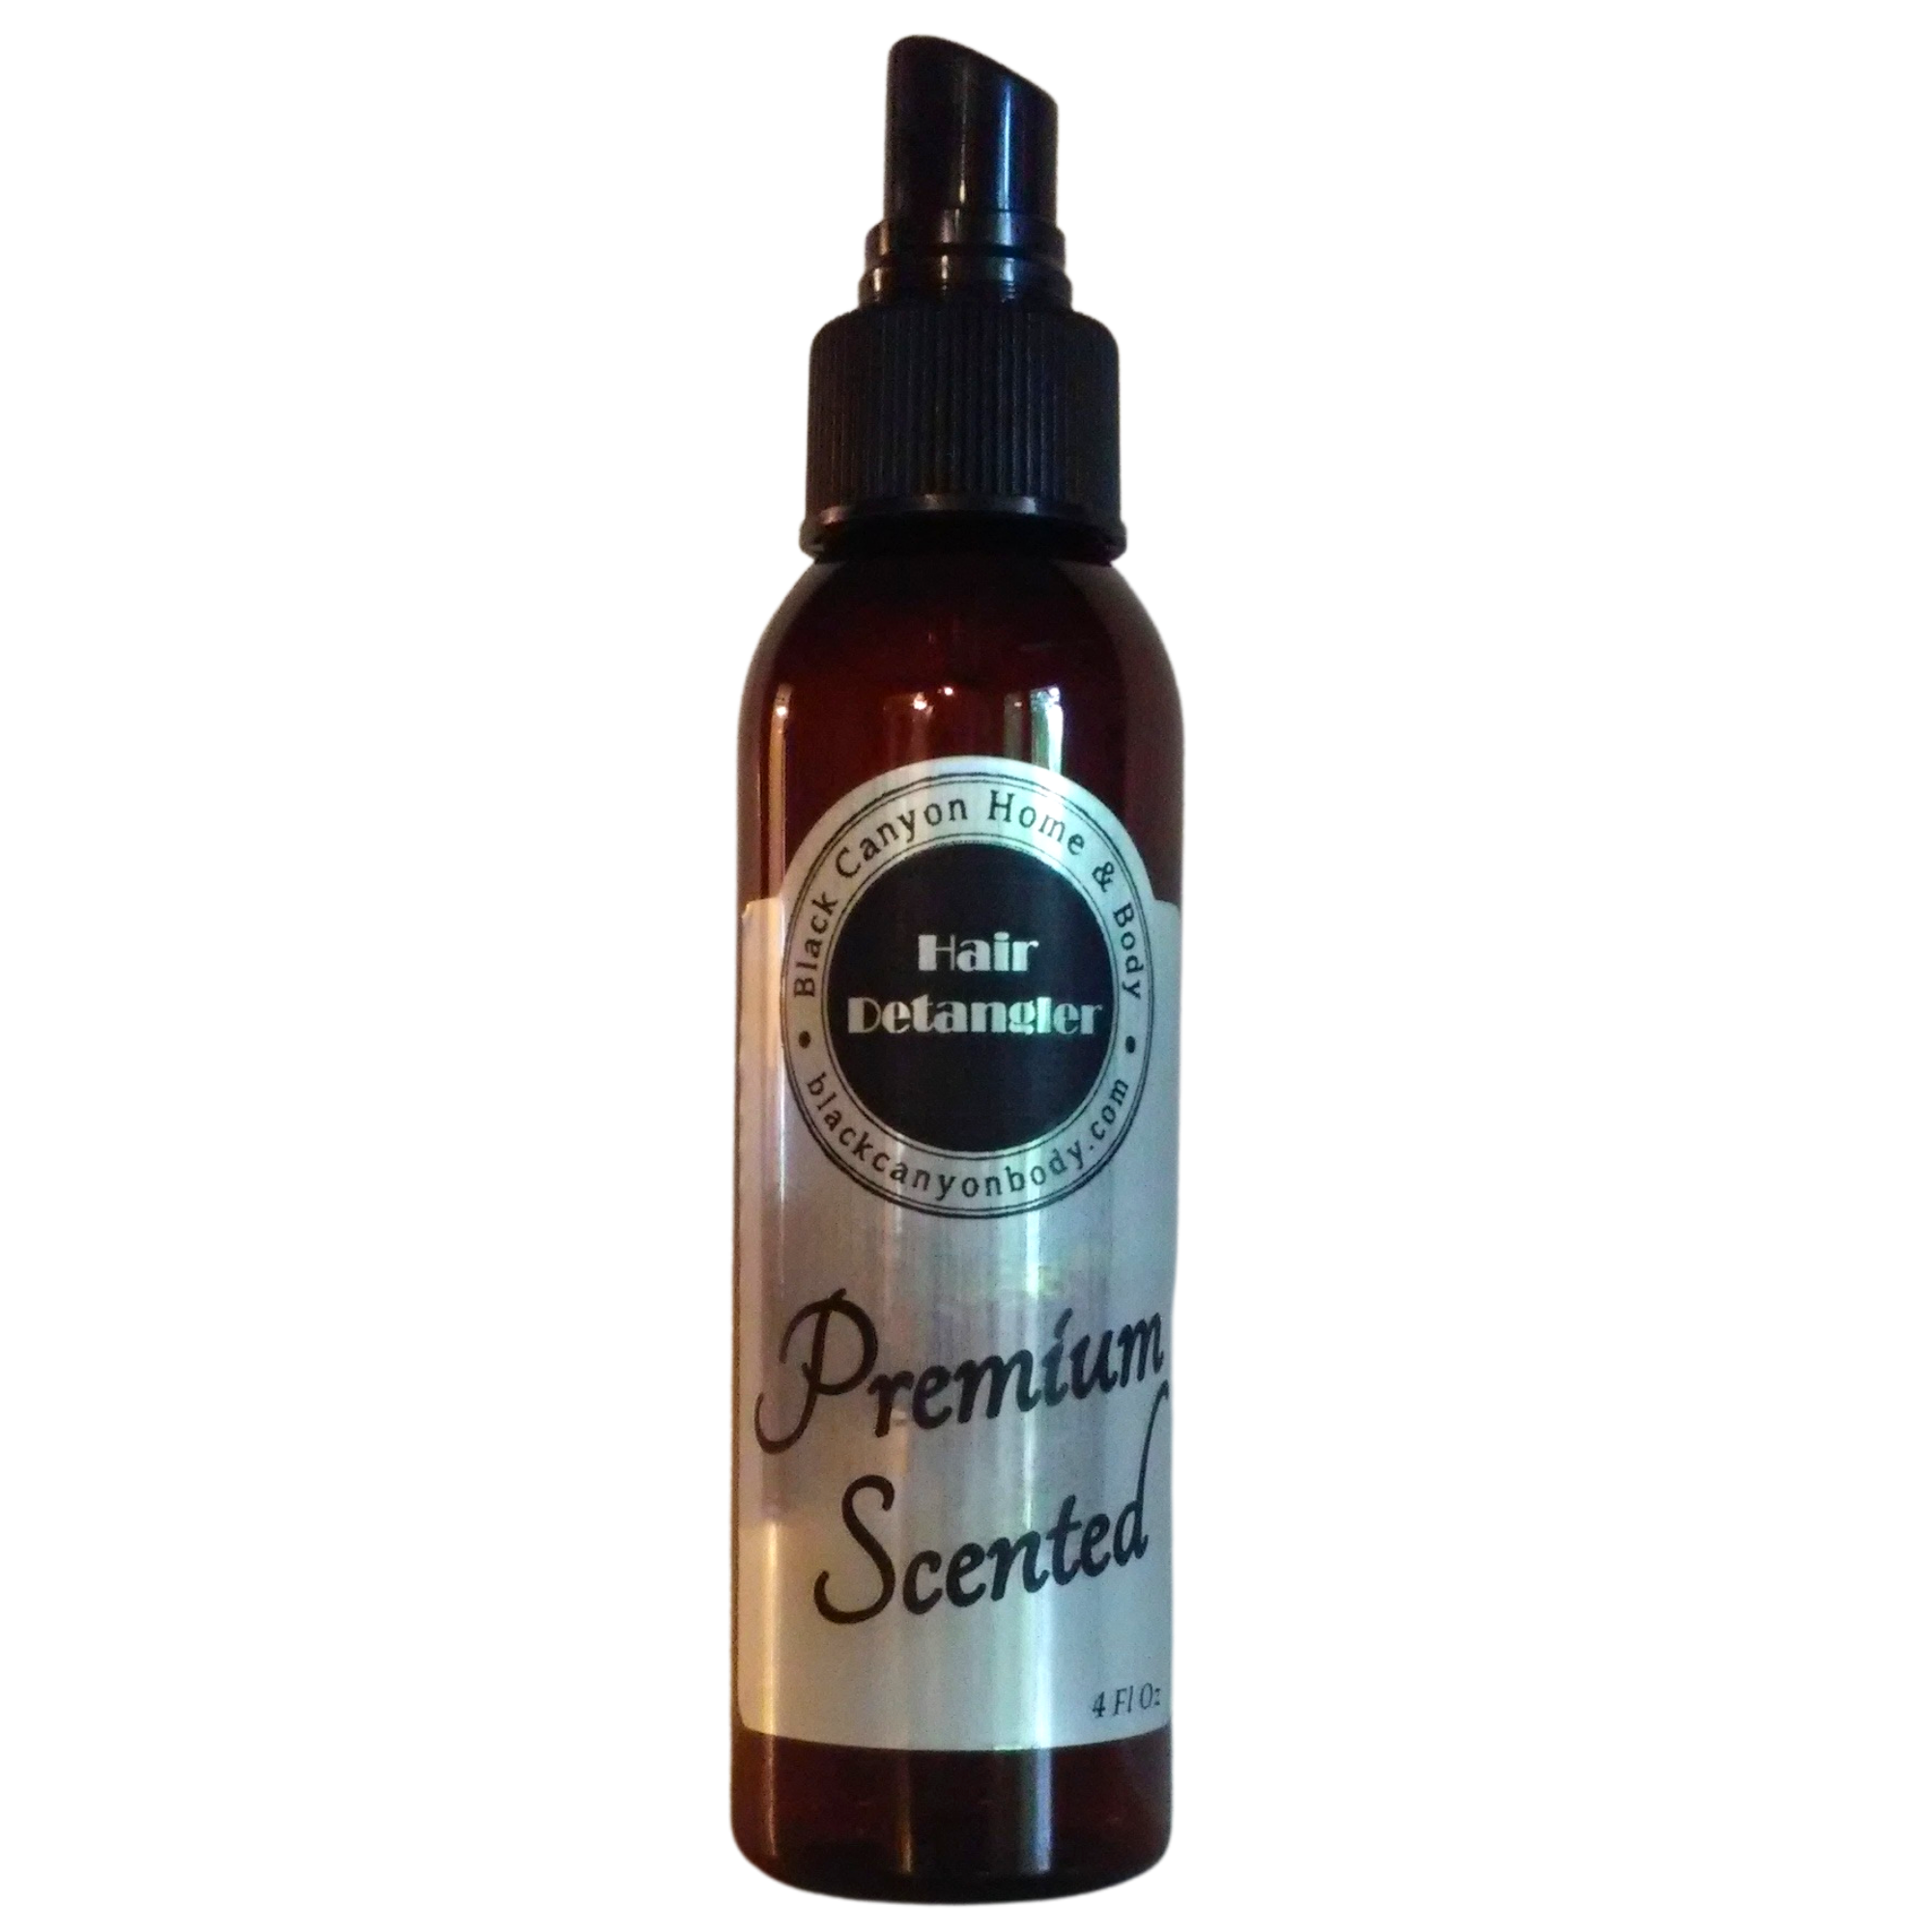 Black Canyon Christmas Candy Cane Scented Hair Detangler Spray with Olive Oil